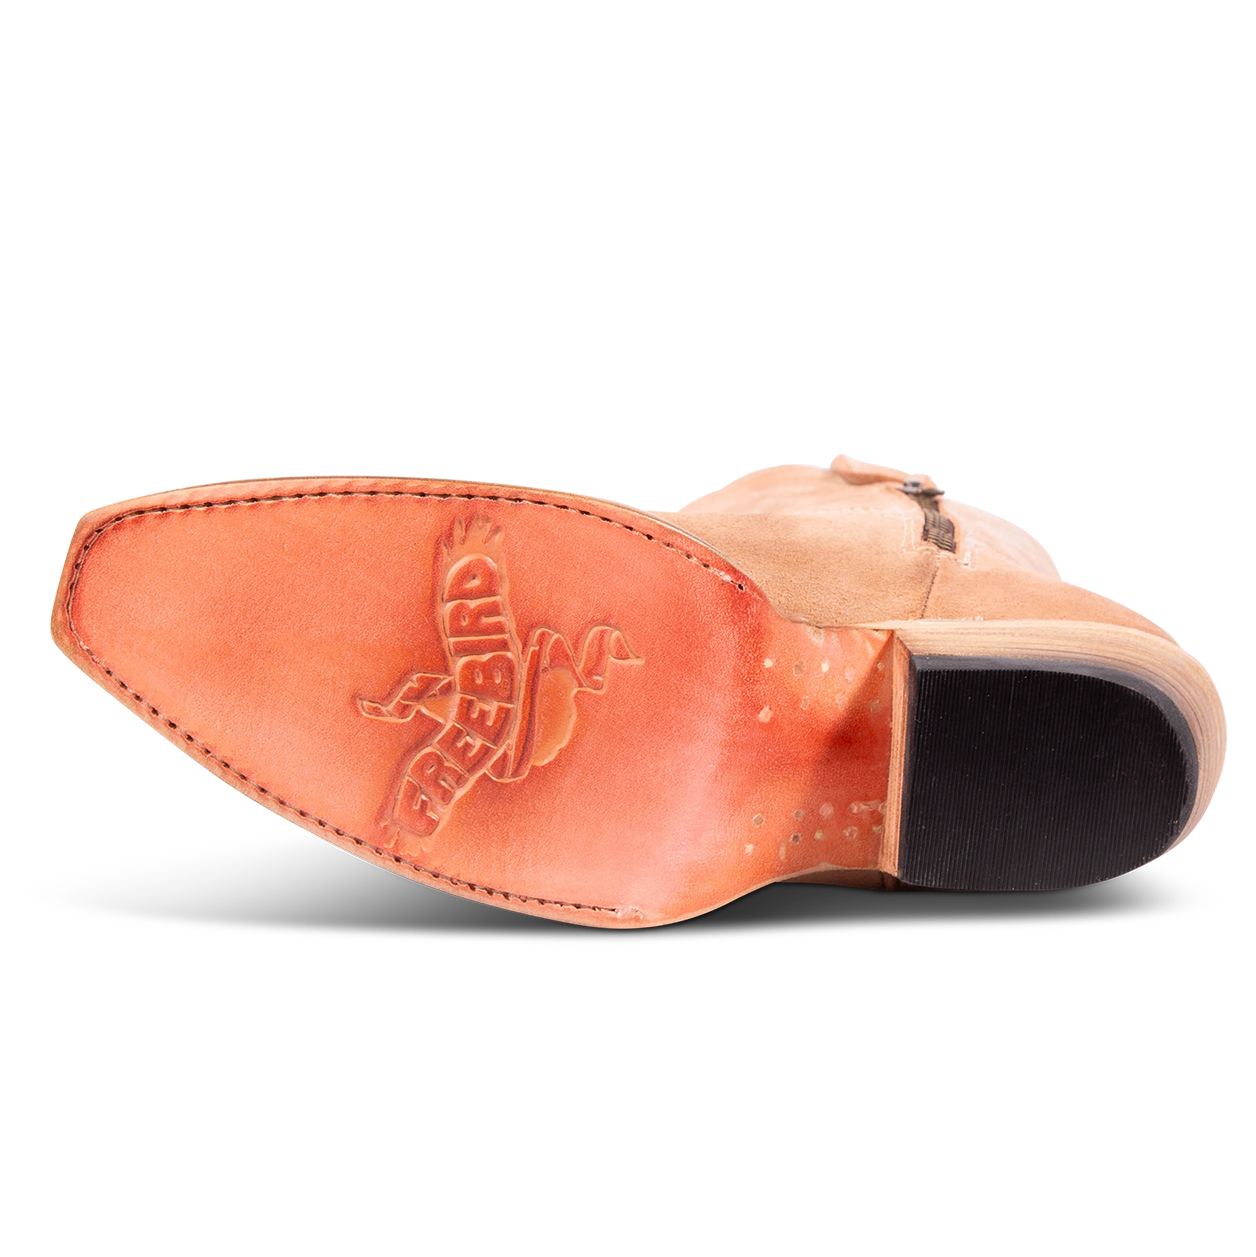 Blush leather sole imprinted with FREEBIRD on women's Wilson blush suede western boot